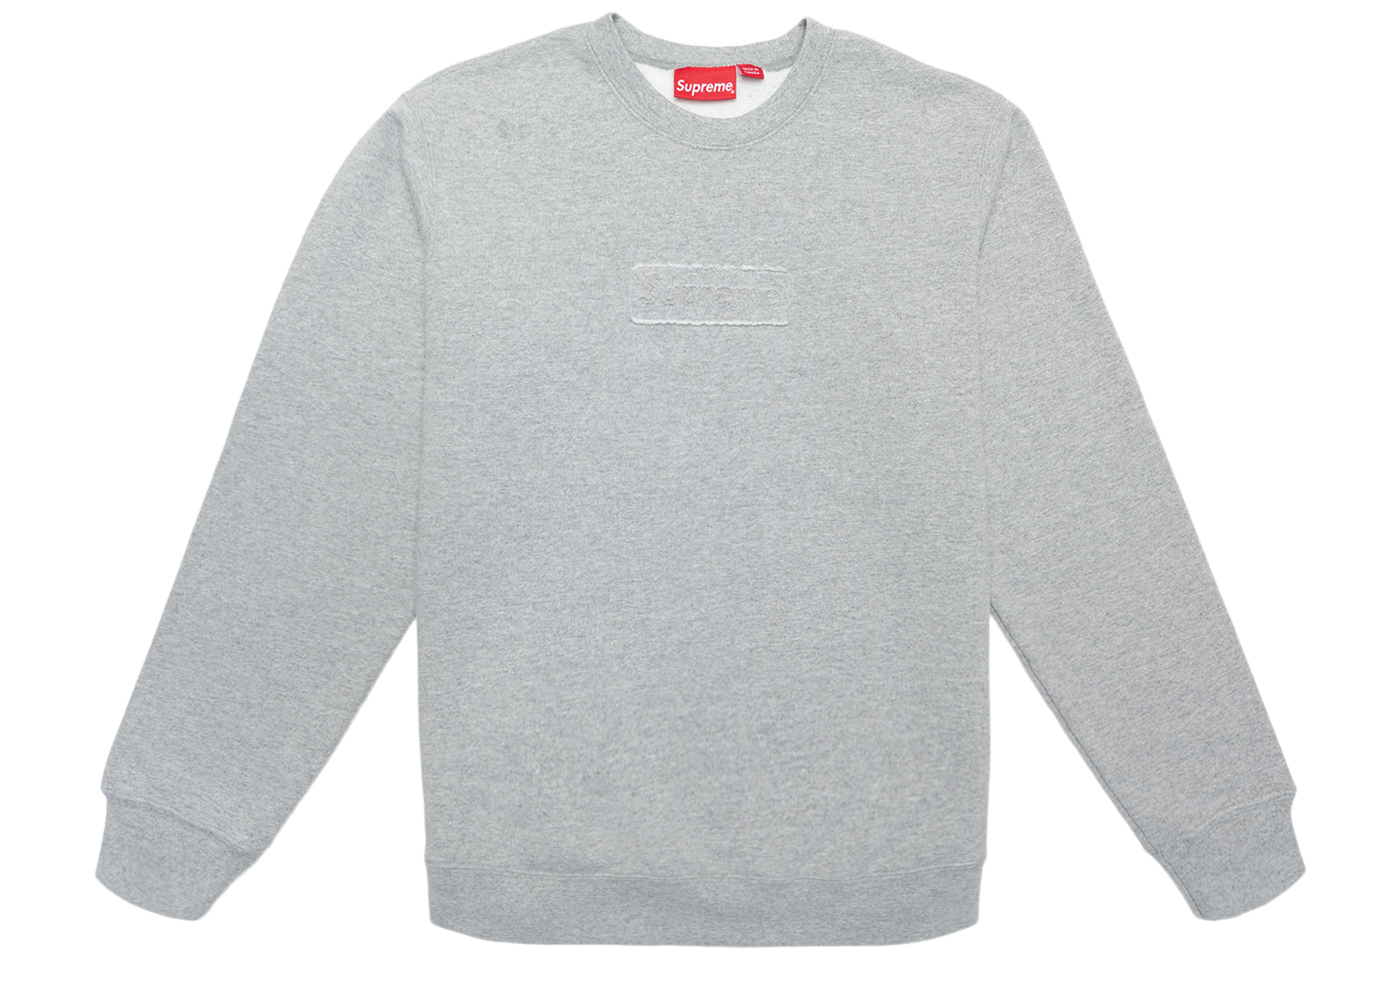 Stockx Supreme Crewneck Hot Sale, UP TO 52% OFF | www 